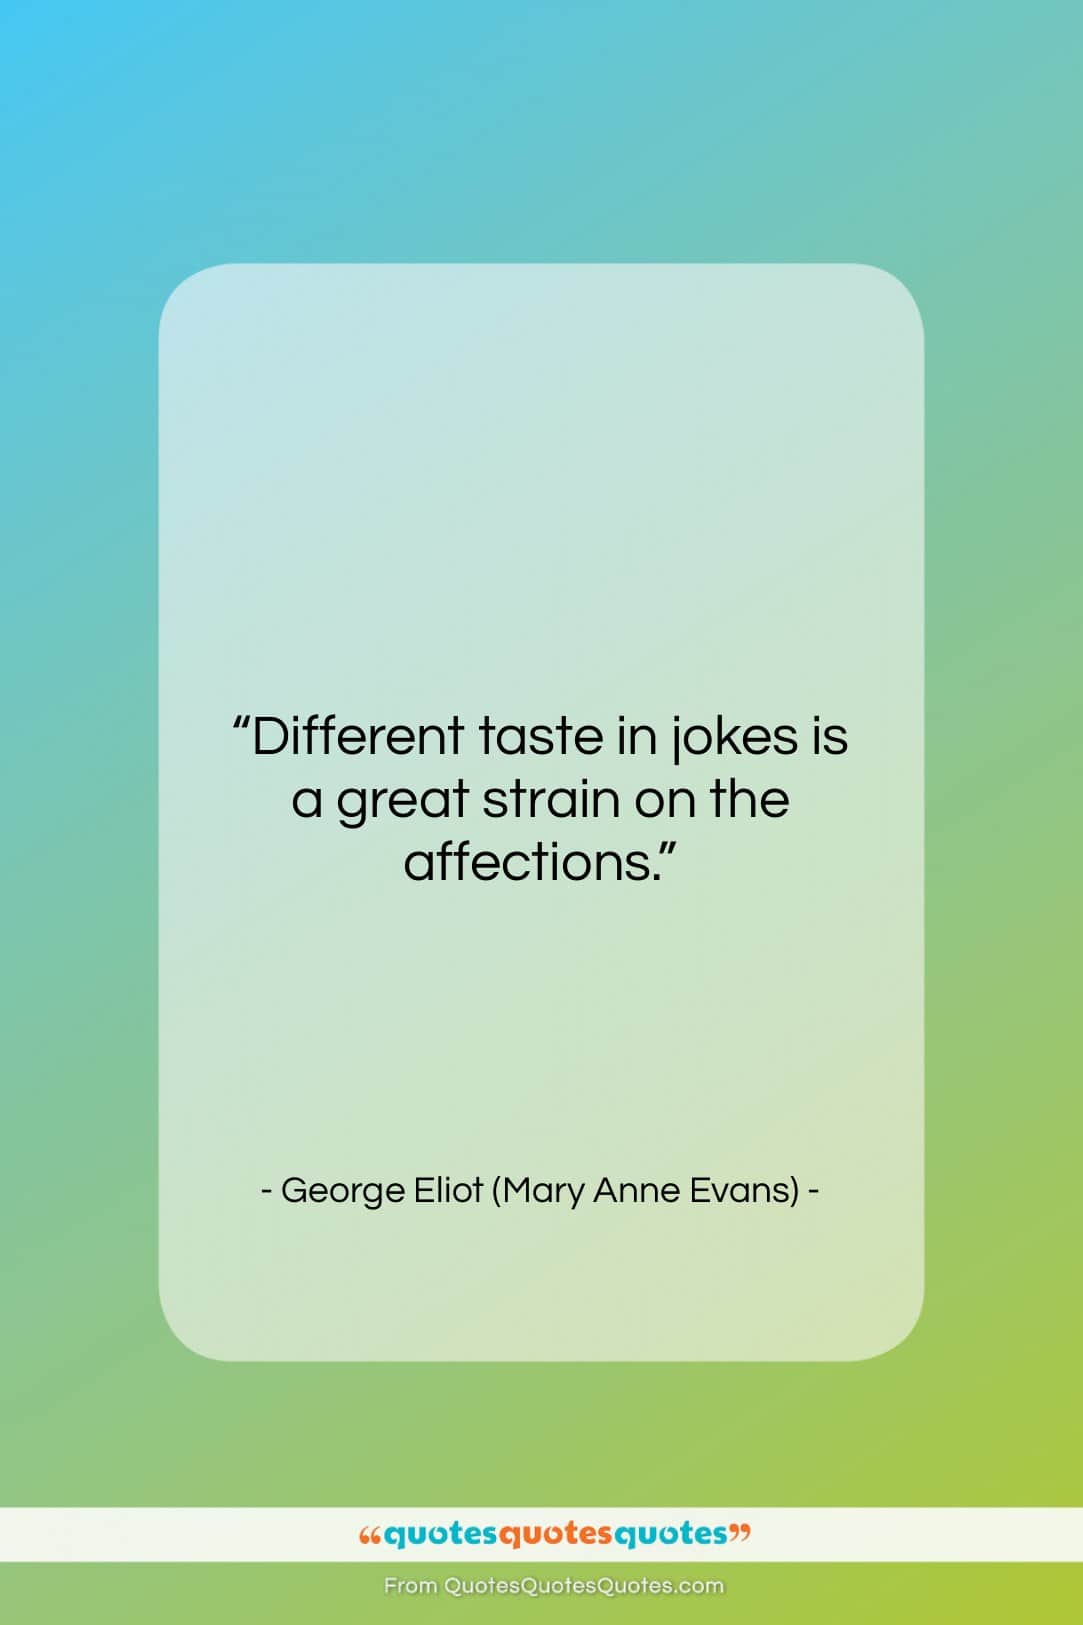 George Eliot (Mary Anne Evans) quote: “Different taste in jokes is a great…”- at QuotesQuotesQuotes.com